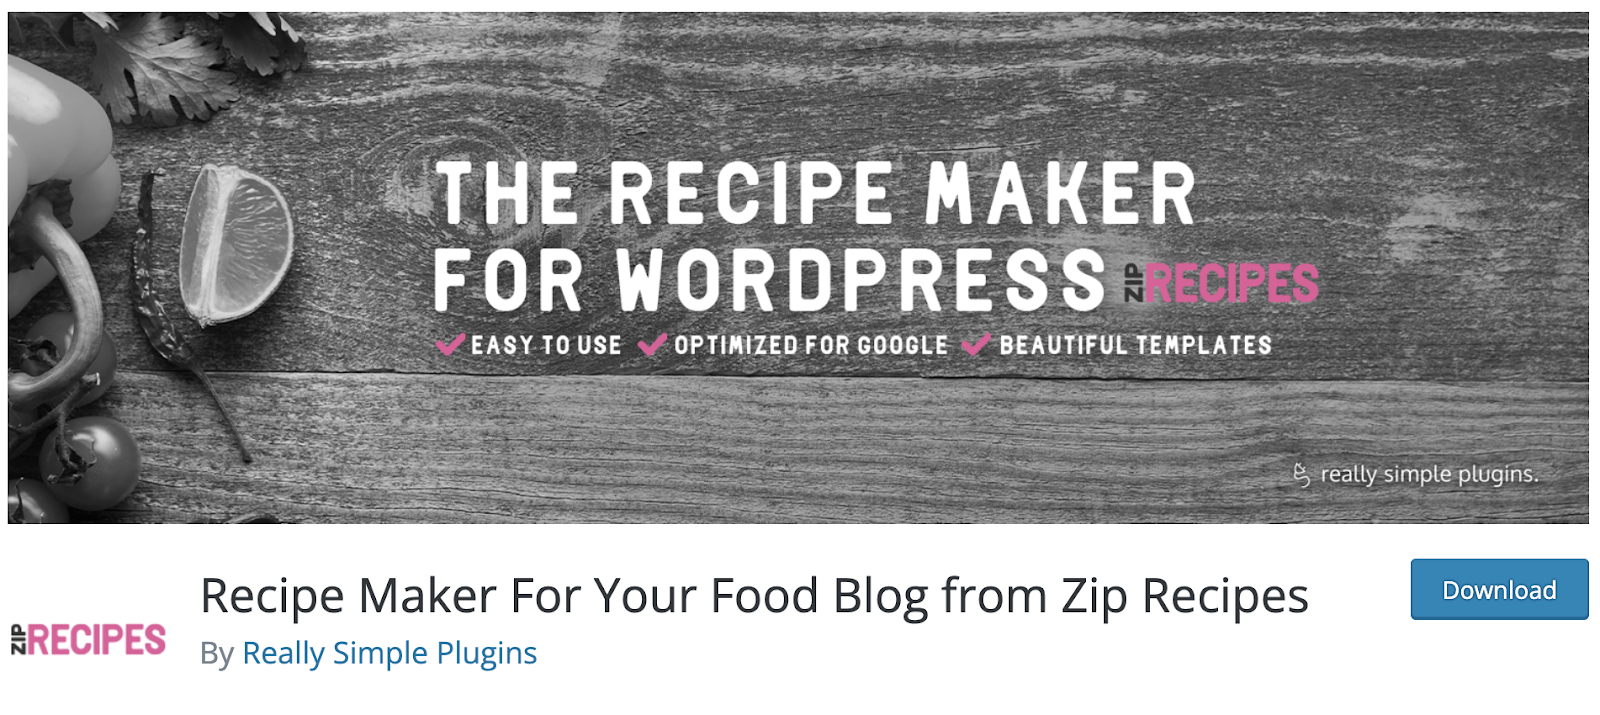 Recipe Maker for your food blog from zip recipes download screen